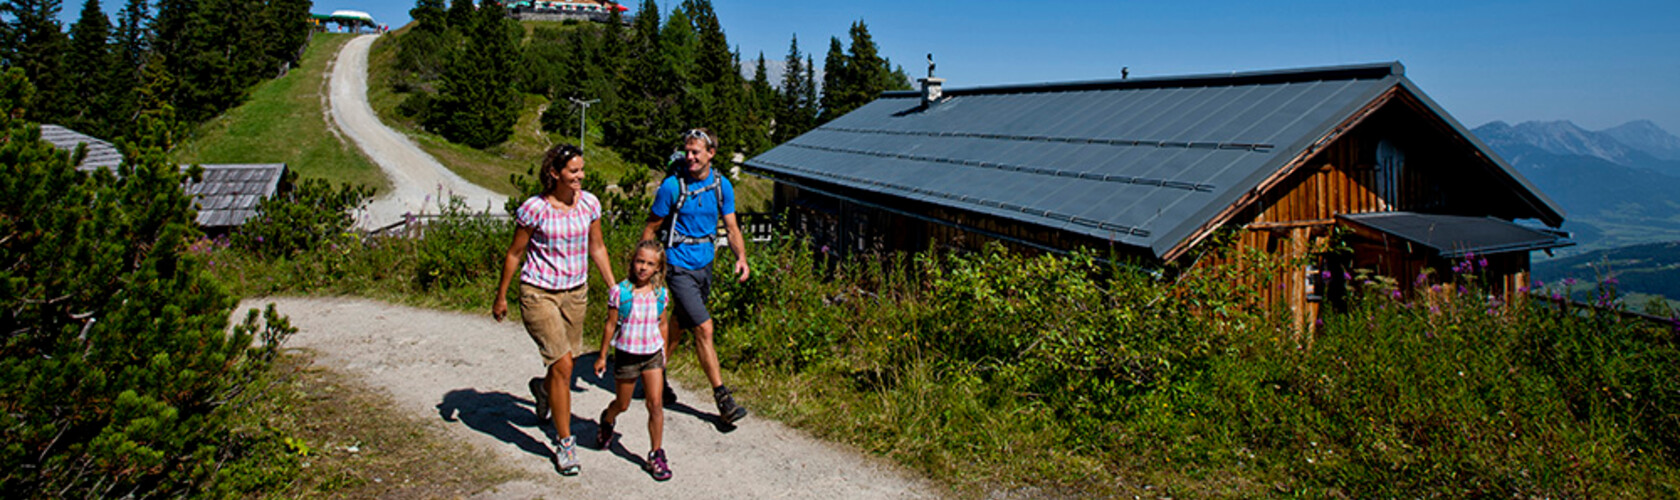 Safely up the mountain with the Schladminger Bergbahnen - Planai & Hochwurzen | © Tom Lamm